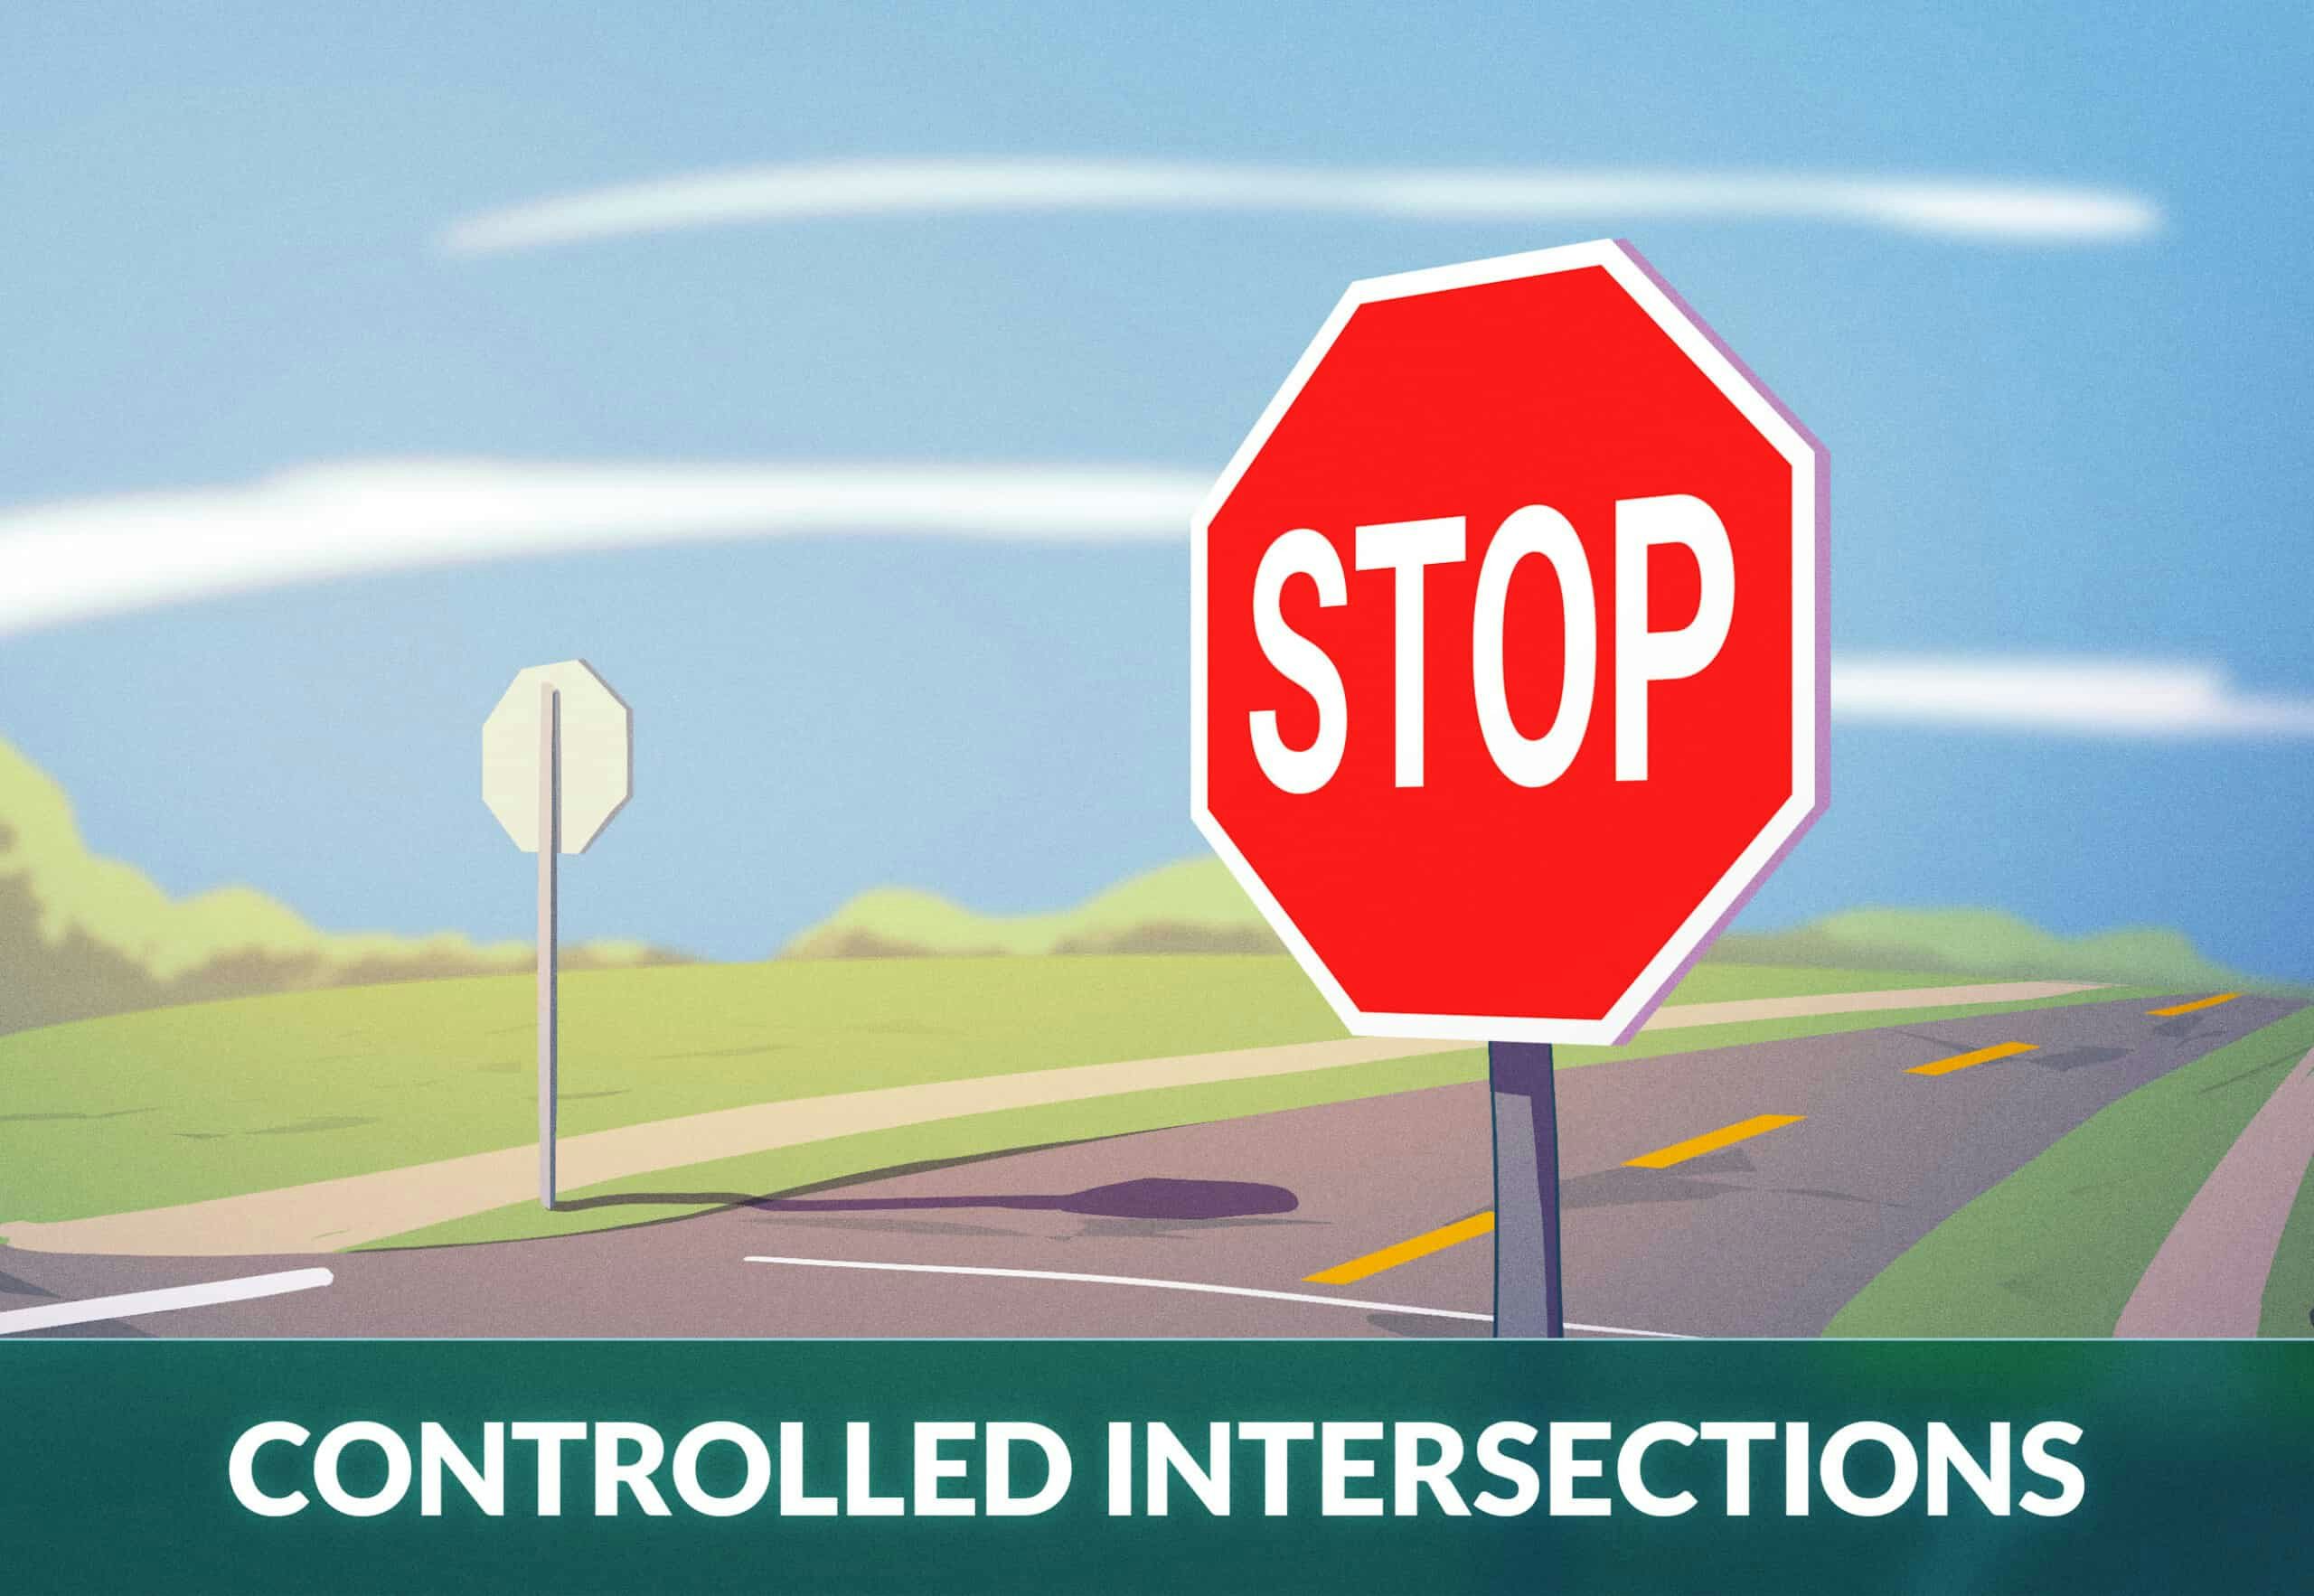 Controlled intersections